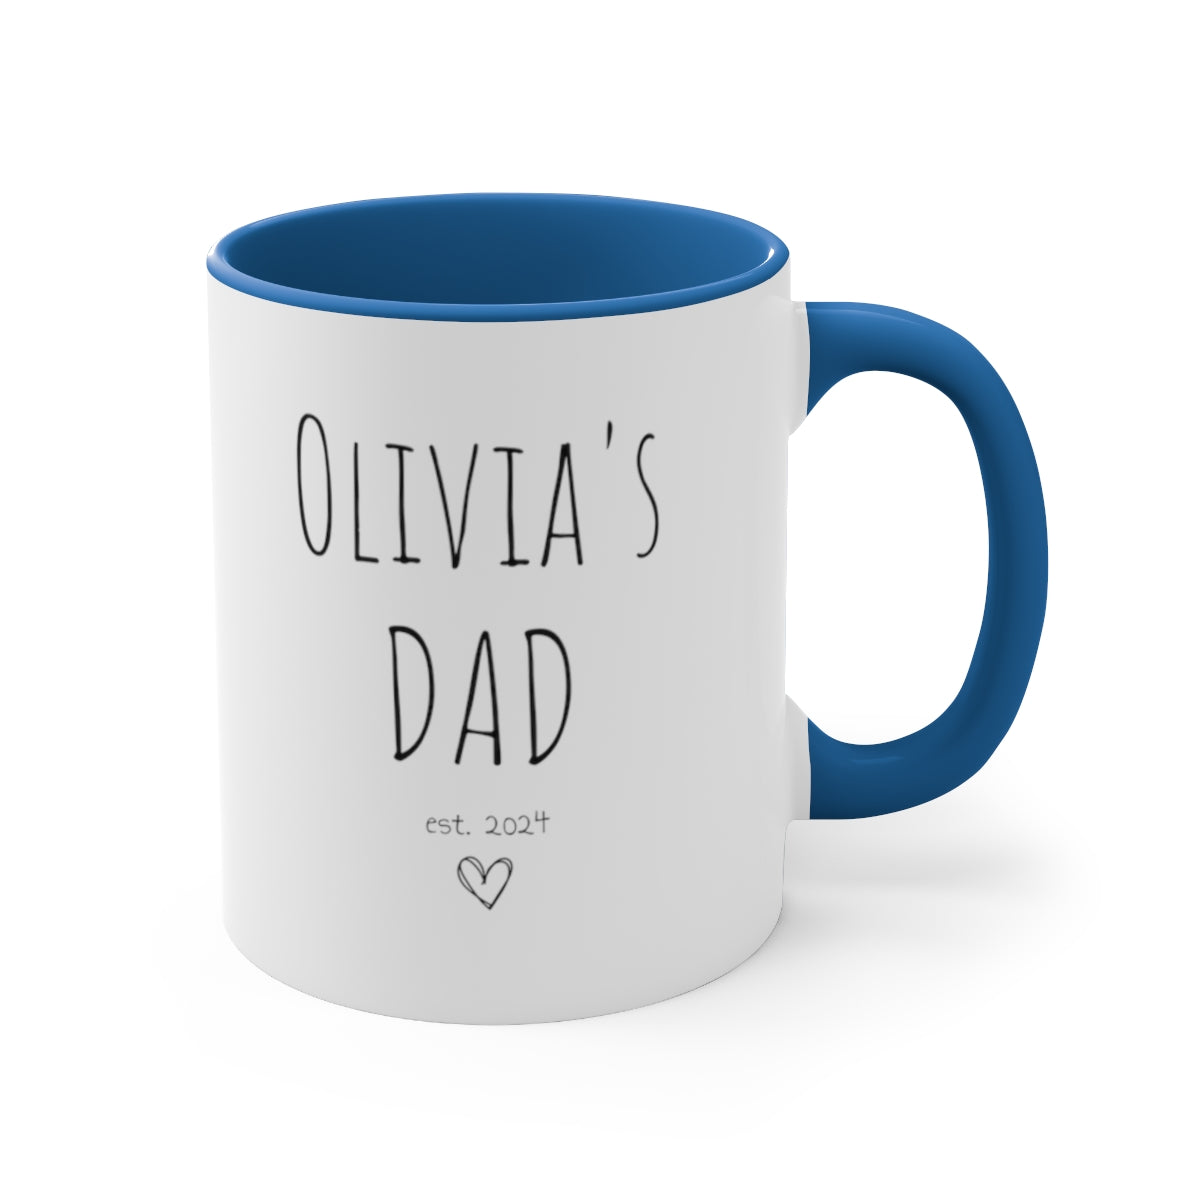 First Time Fathers Day Gift, New Dad Mug First Fathers Day Gifts for Dad Daddy Mug, Personalized Dad Gift Ideas,  Daddy Coffee Cup